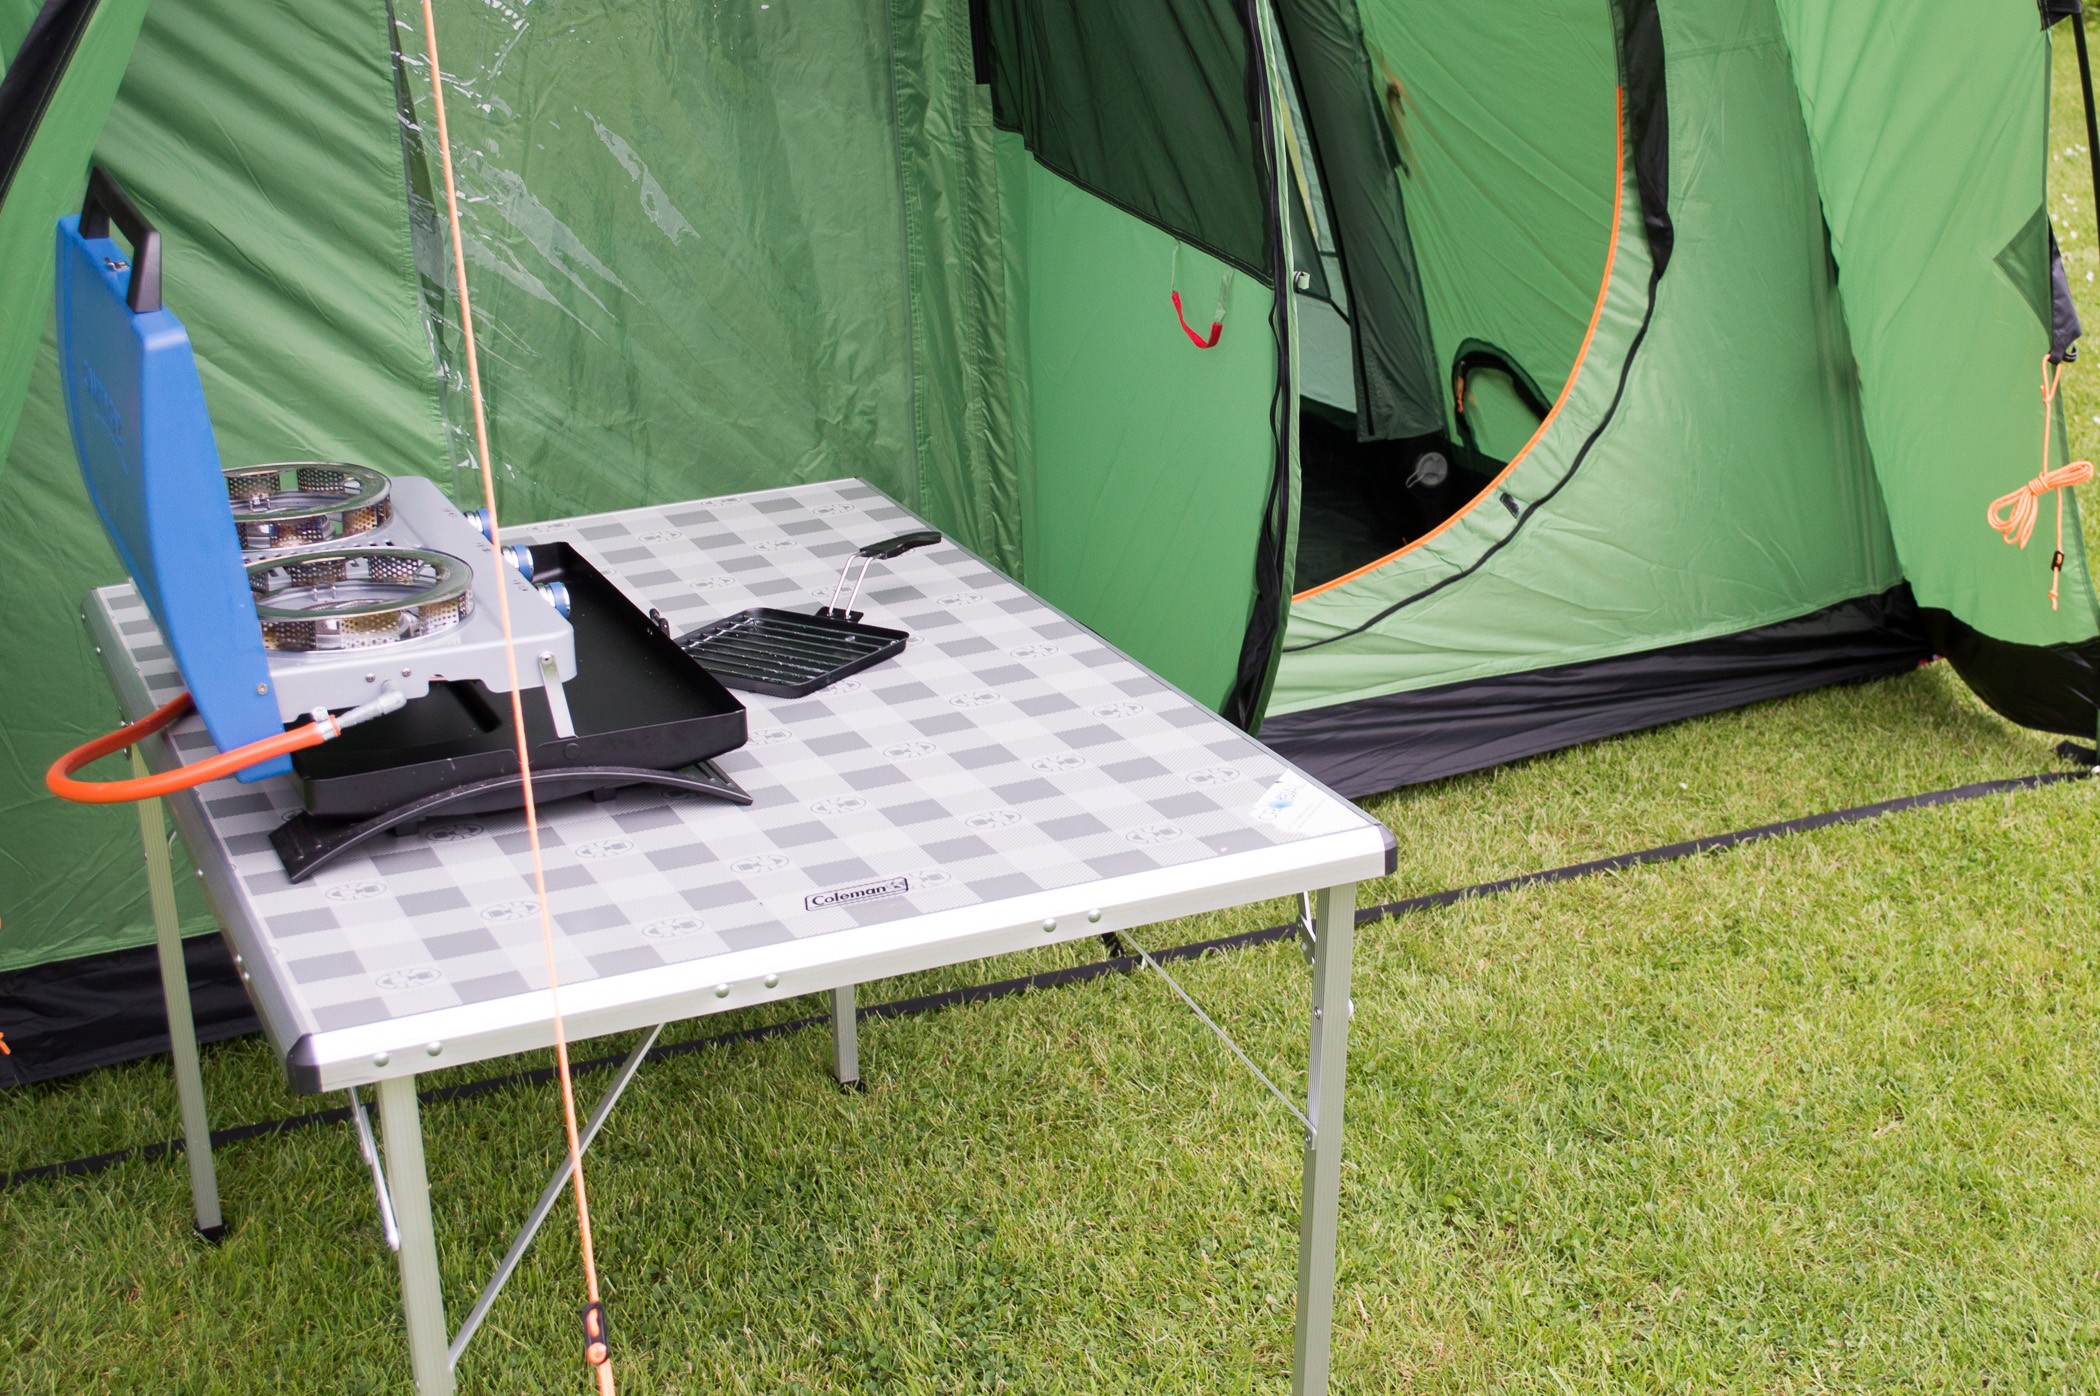 Using the Coleman Antimicrobial Table at the Campsite